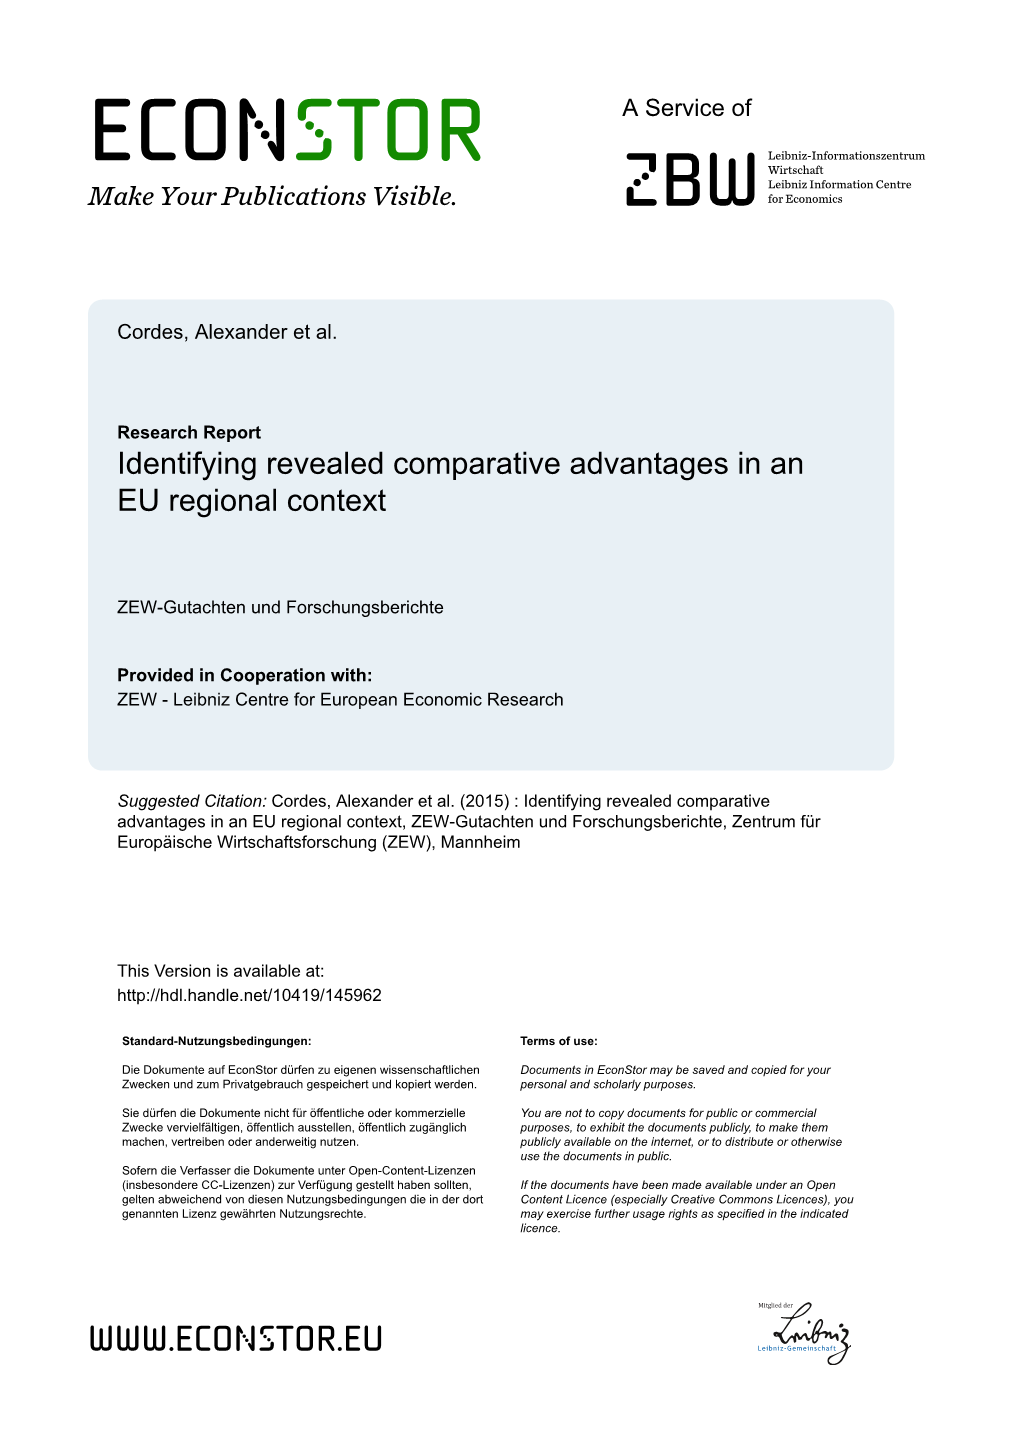 Identifying Revealed Comparative Advantages in an EU Regional Context